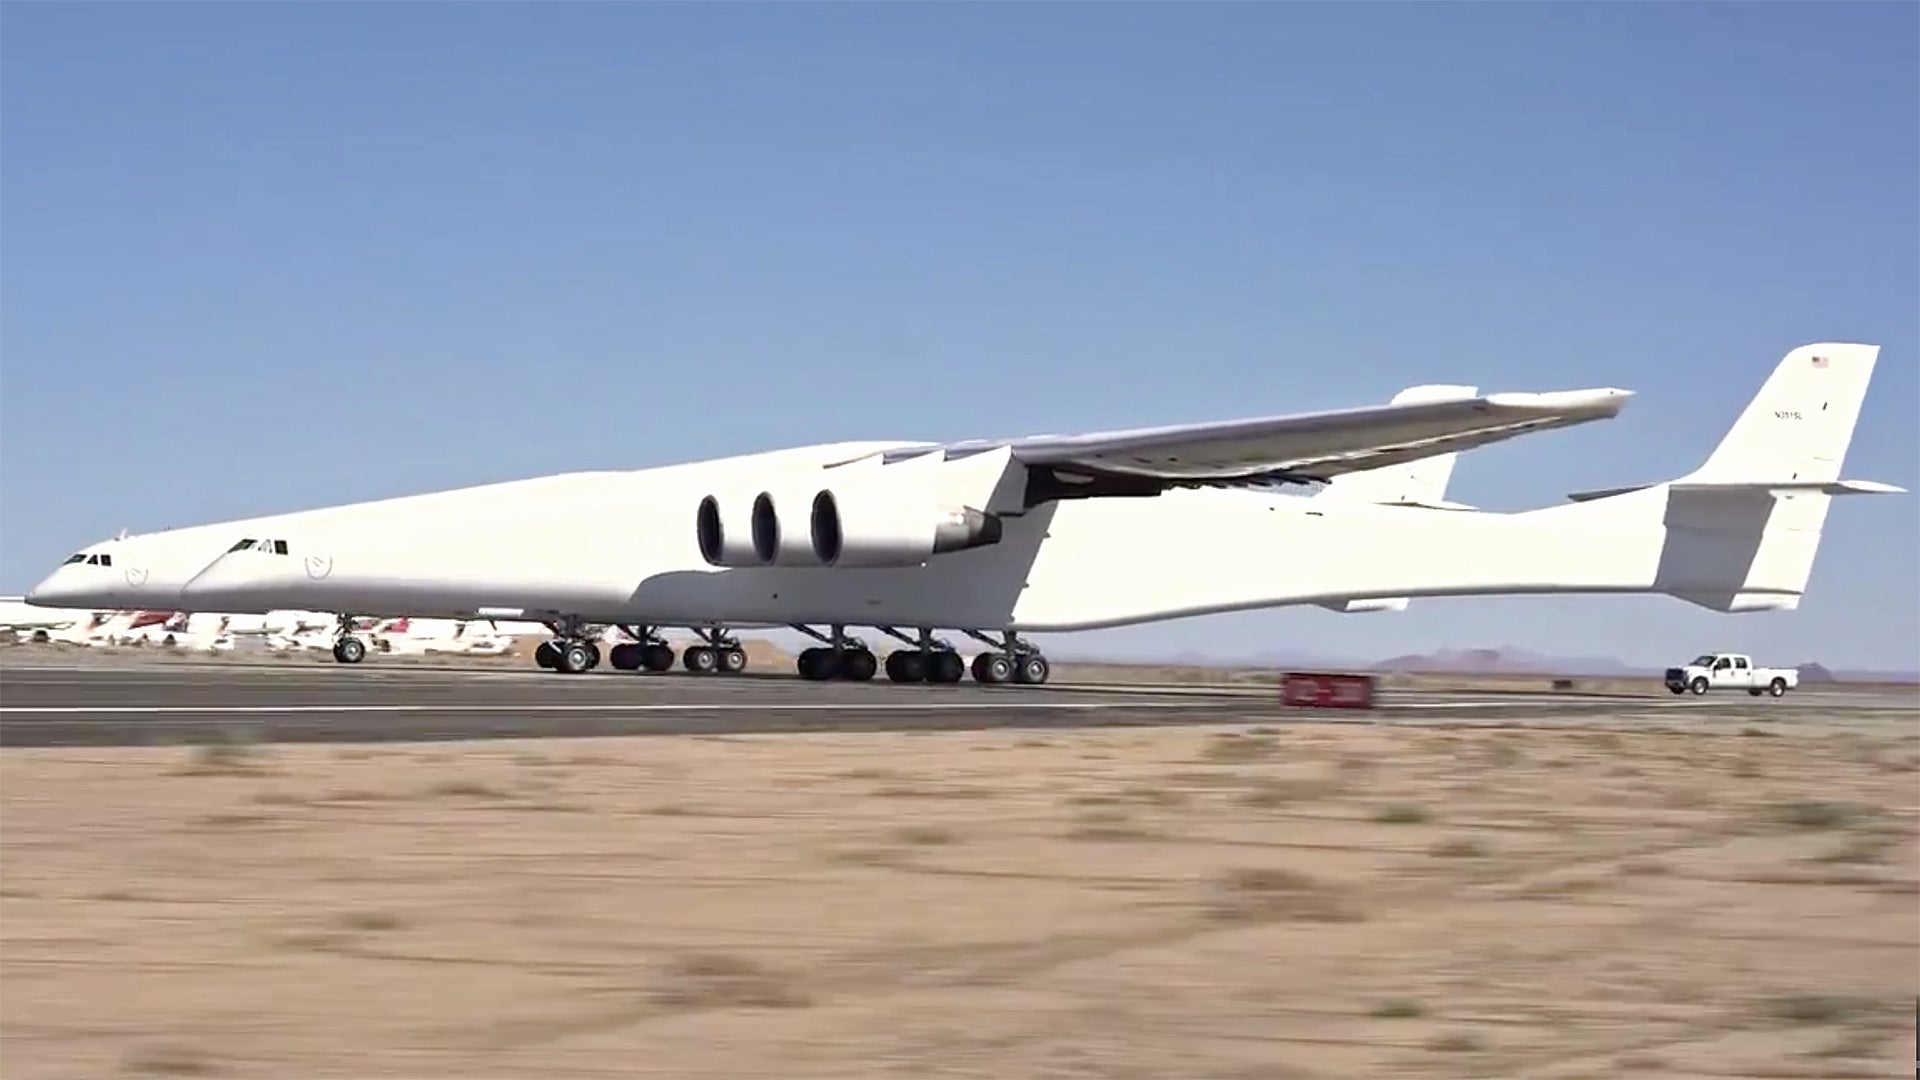 Stratolaunch Rumbles Down Runway As Pentagon’s Interest In Rapid Space Access Mounts